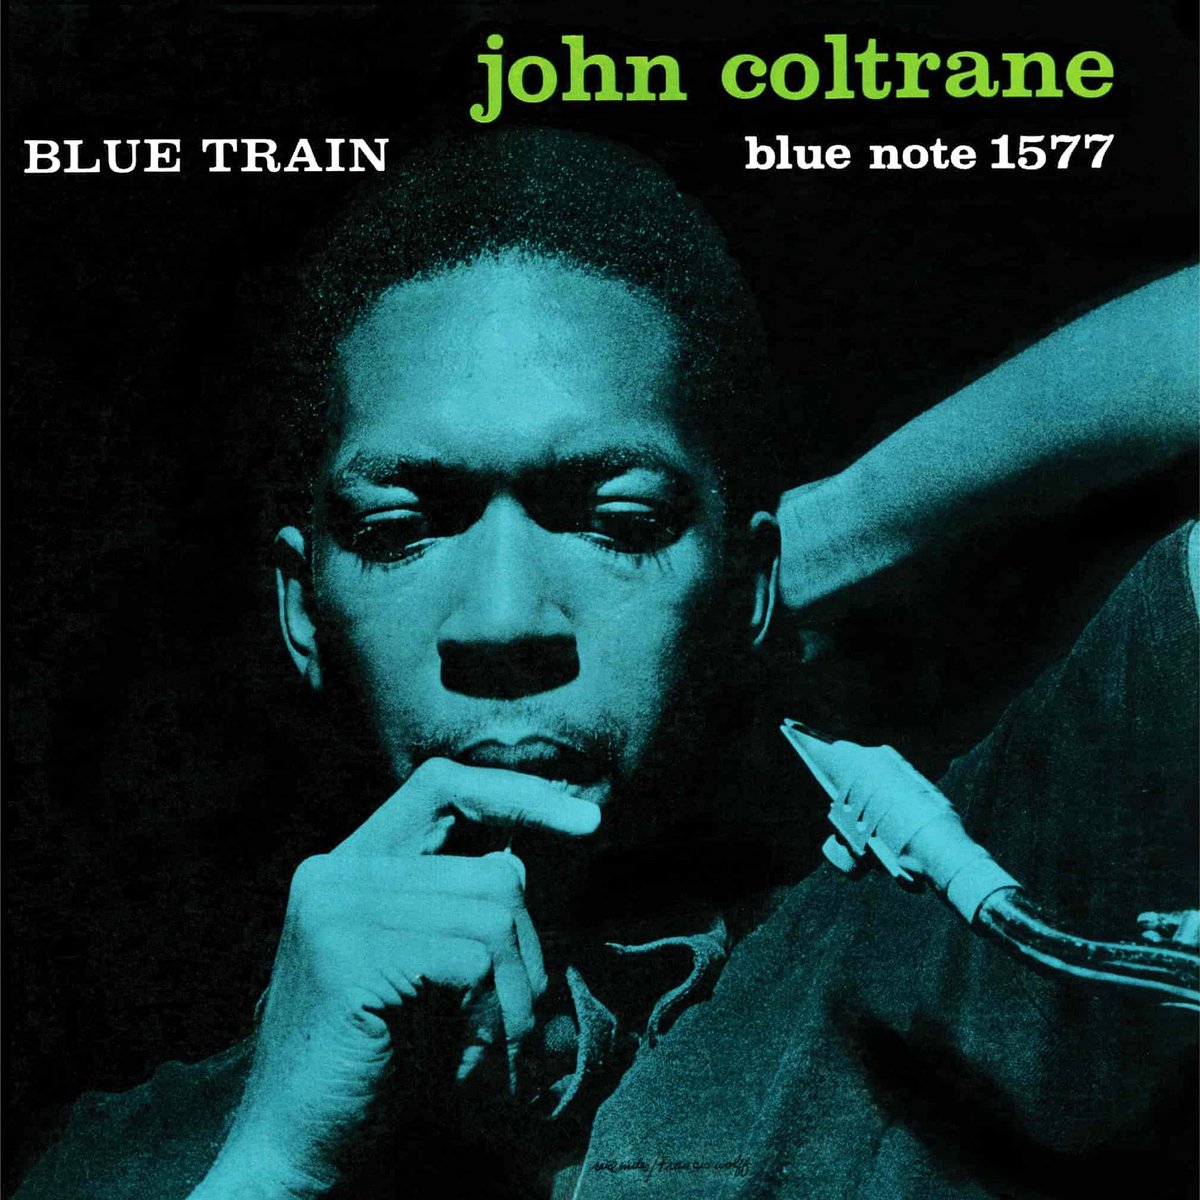 Today’s Great Jazz Album is “Blue Train” by John Coltrane, released by Blue Note Records in January of 1958 (recorded on 9/15/1957).